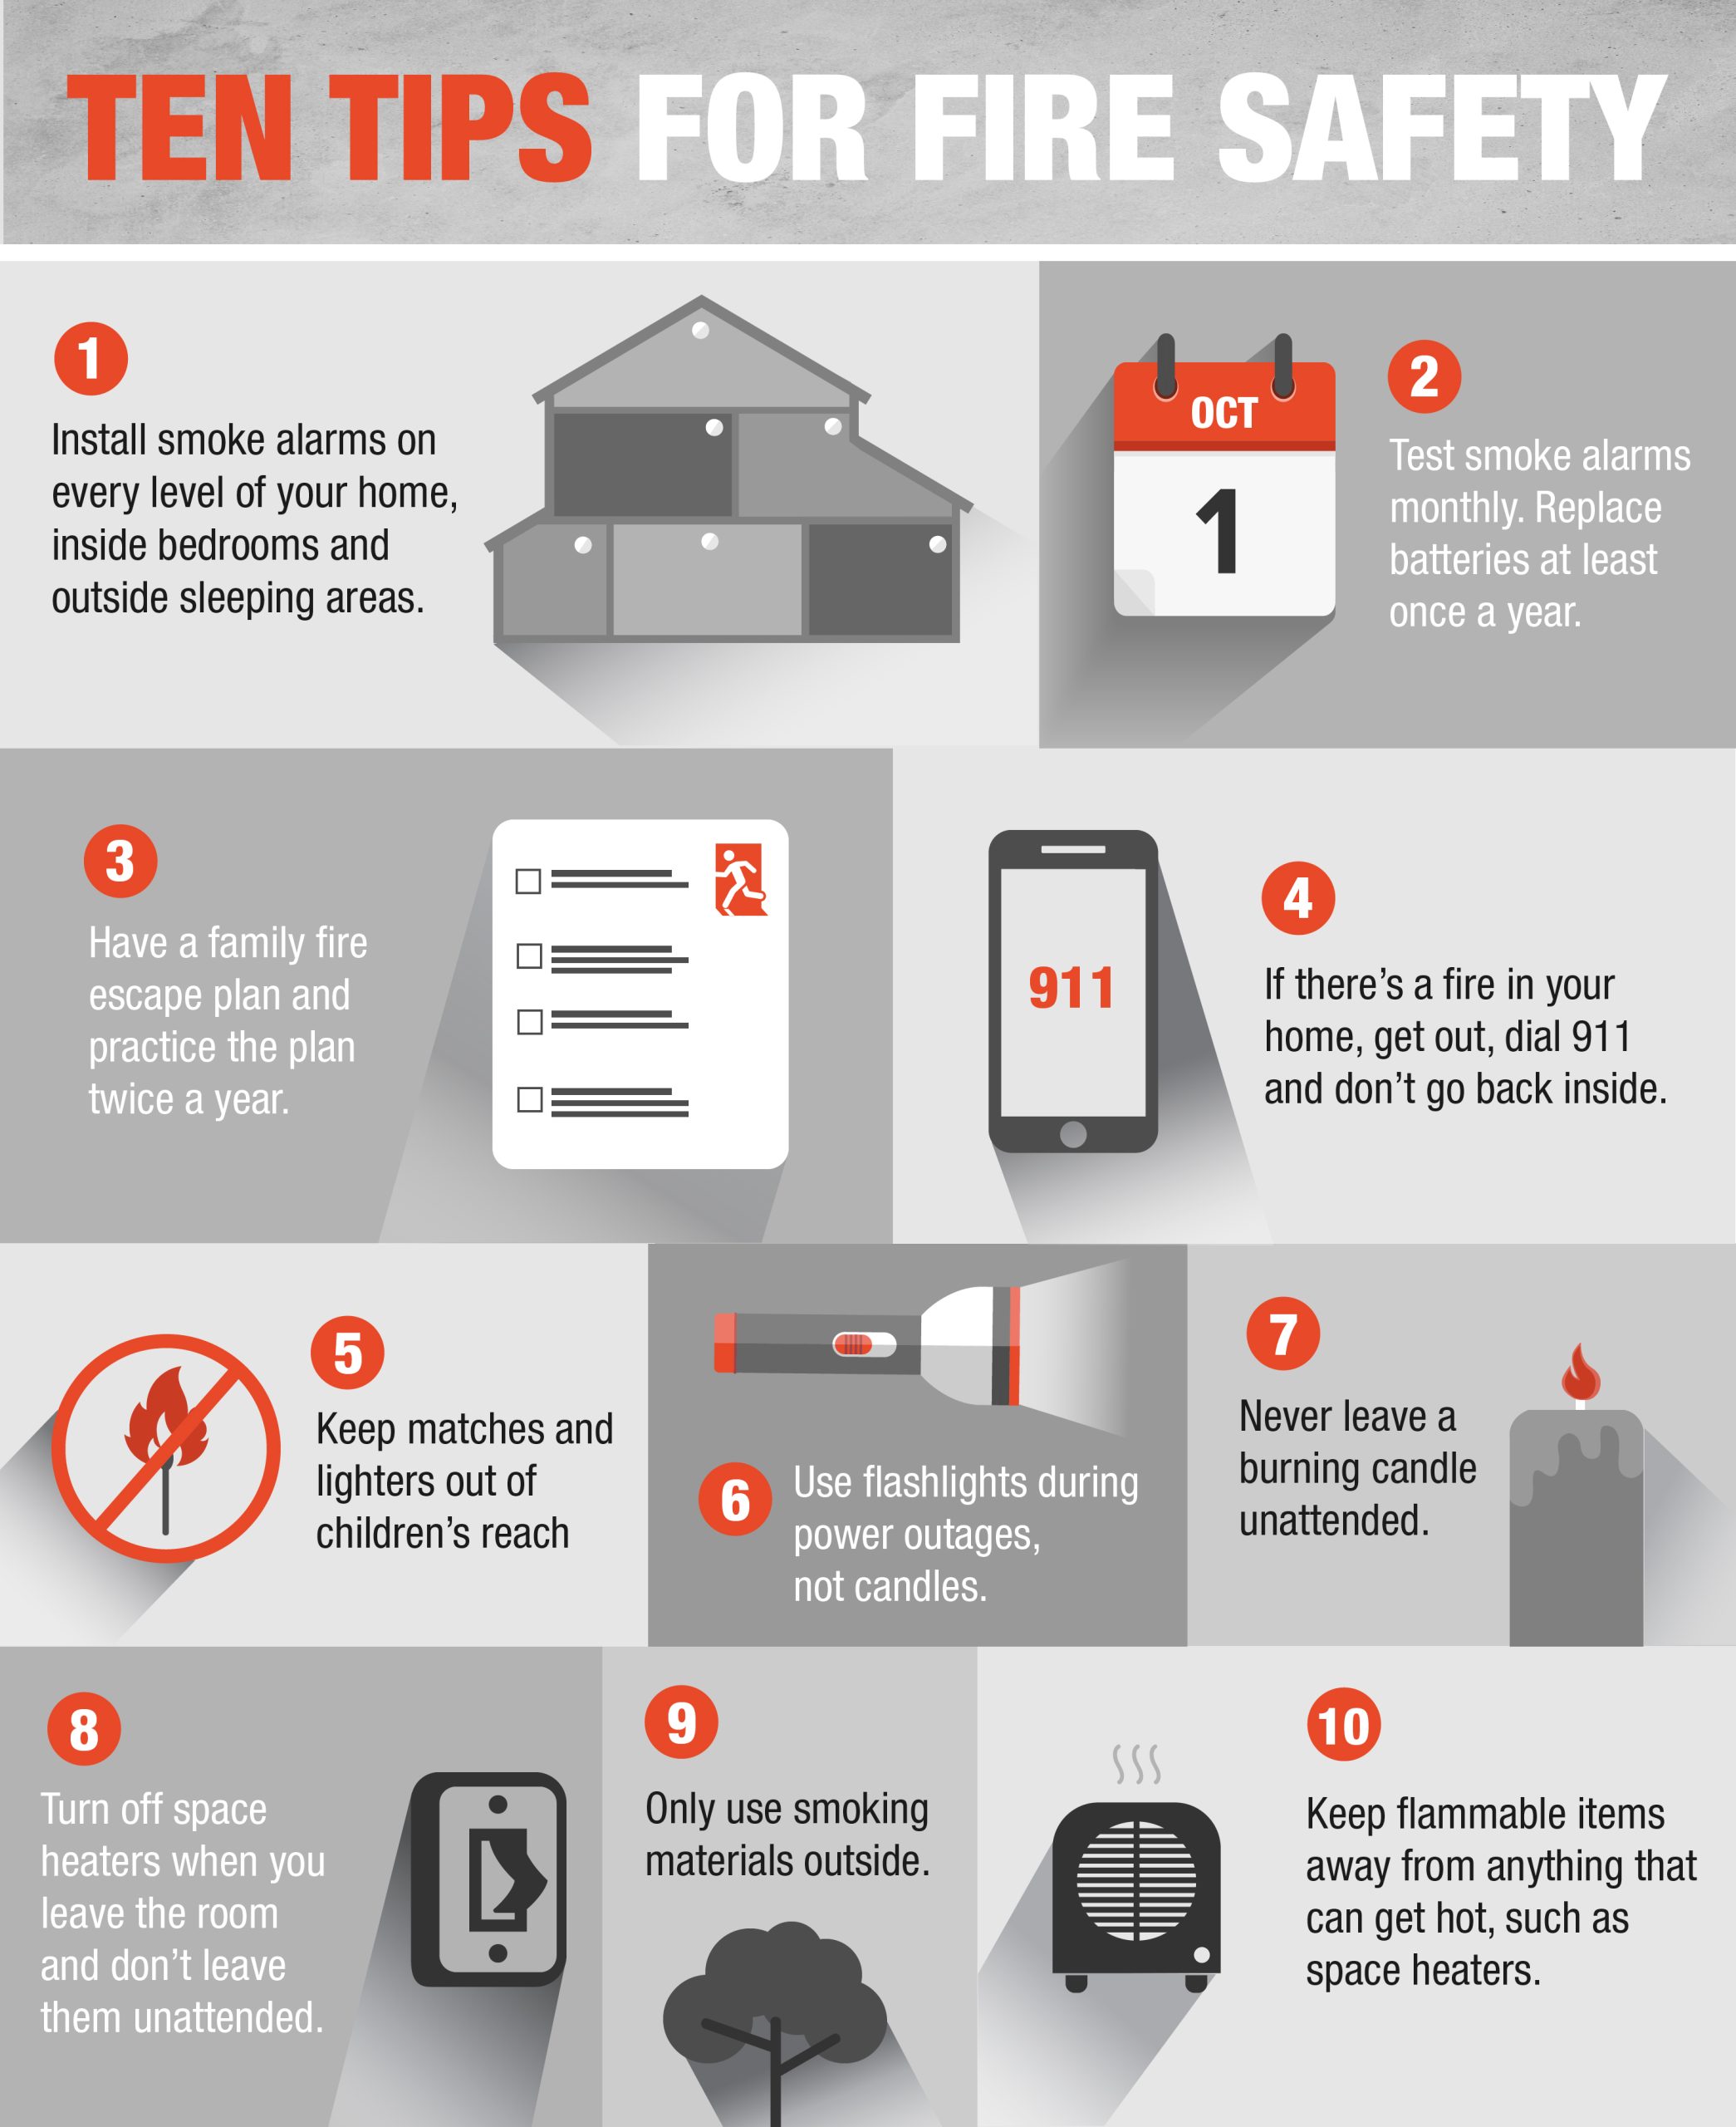 10 Fire Safety Tips When Leaving Home